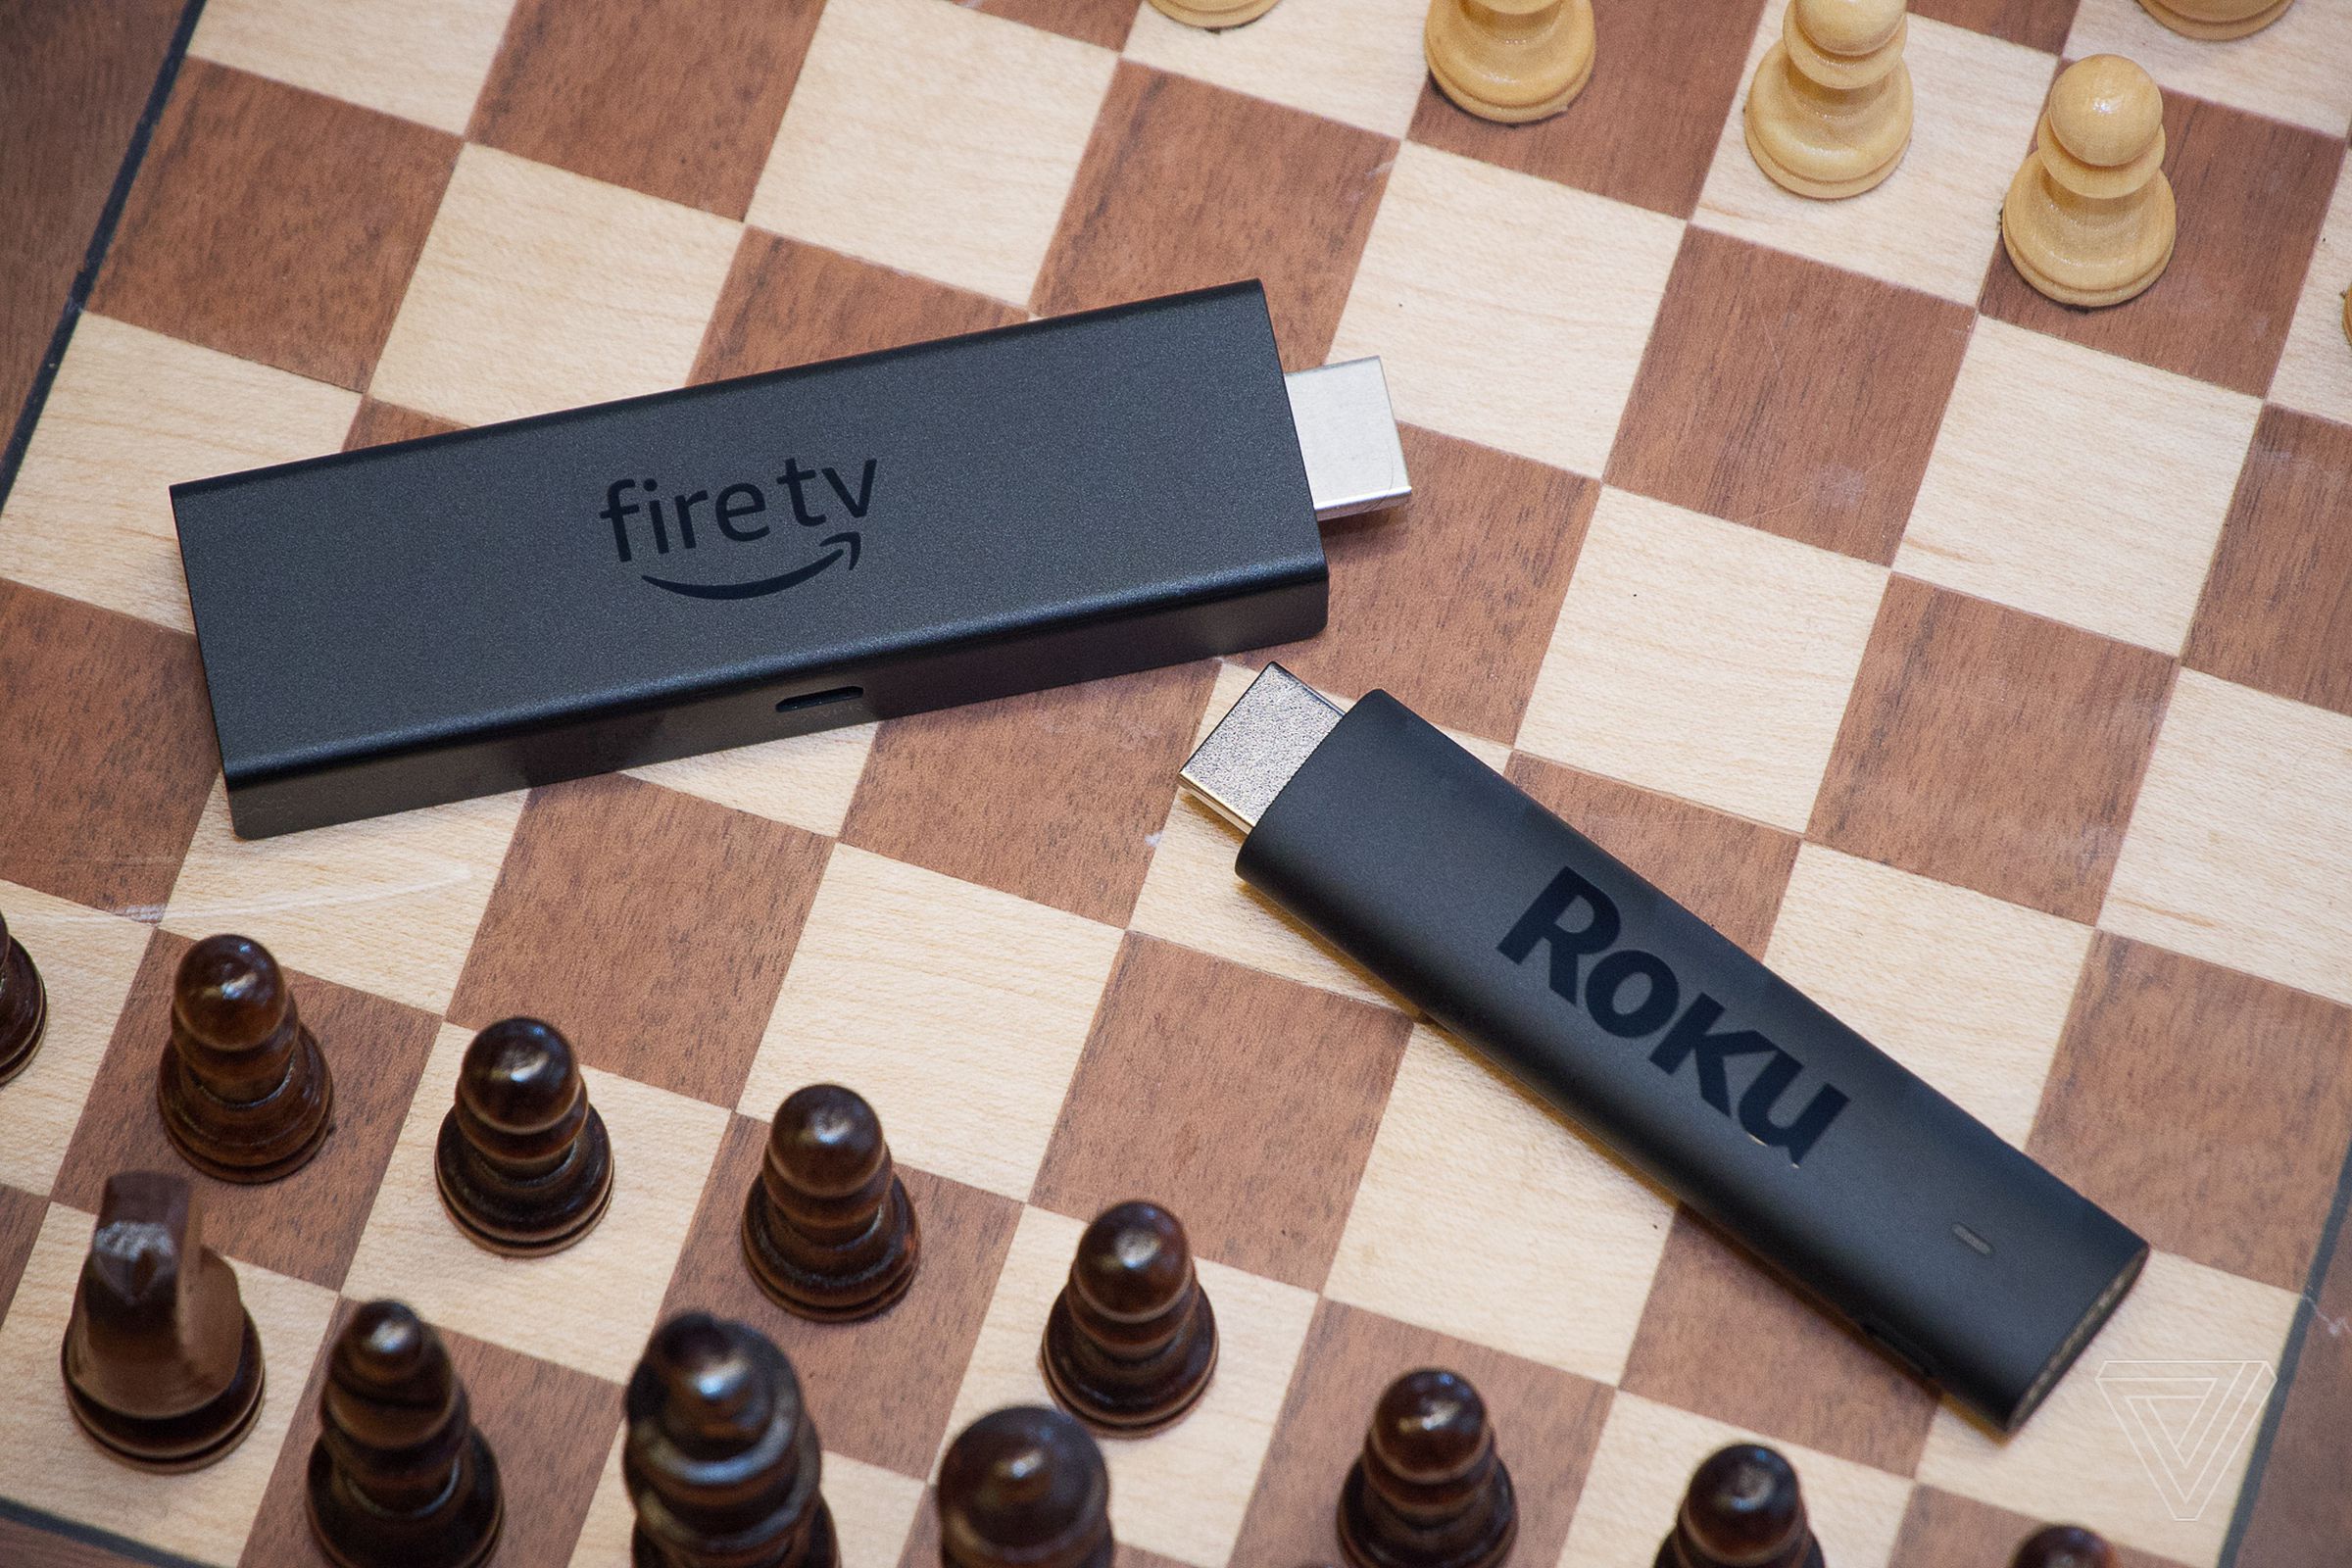 Amazon’s Fire TV stick and a Roku streaming device.